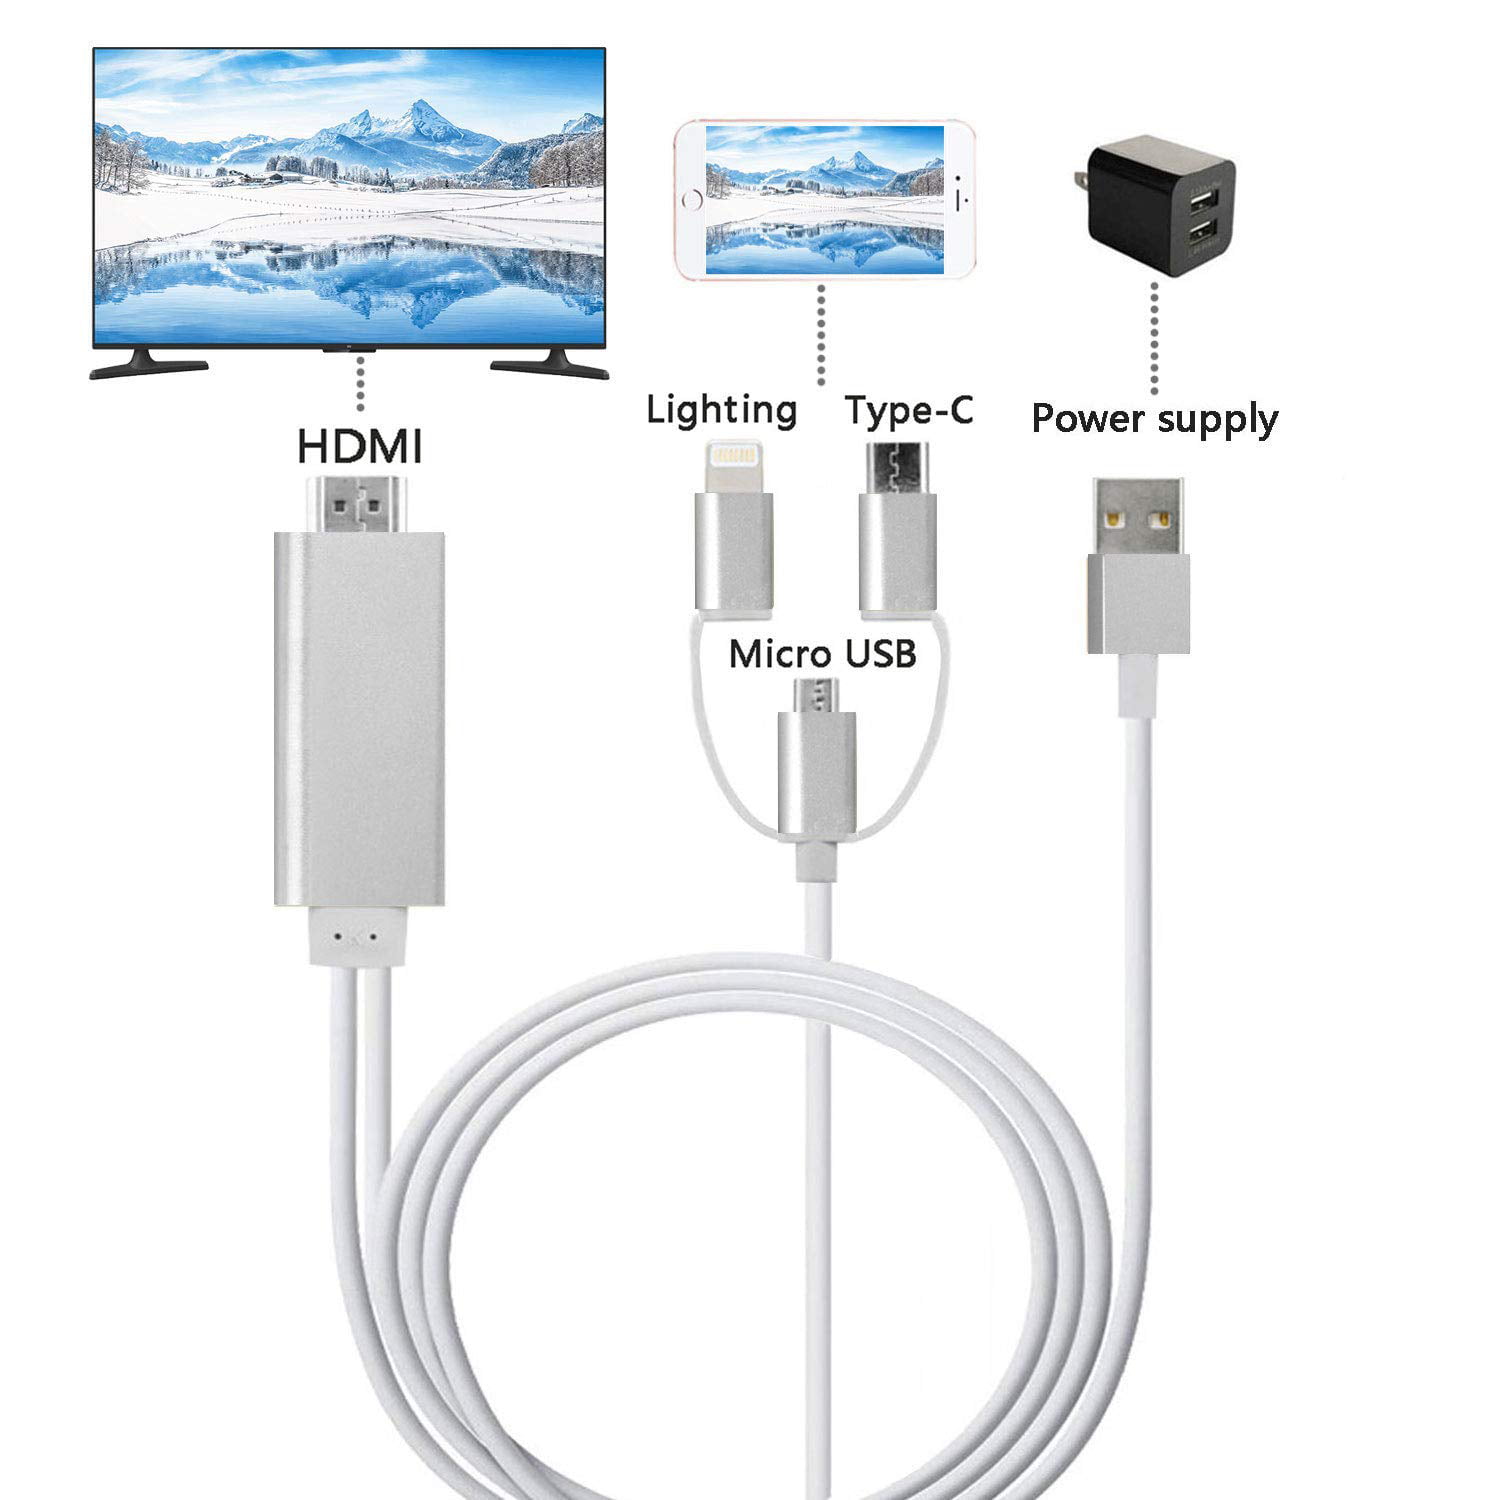 3 in 1 HDMI Adapter Cable CiBest Type-C/Micro USB/iPhone to Projector Monitor HDMI Cable Adapter for All Mobile Phone Devices 